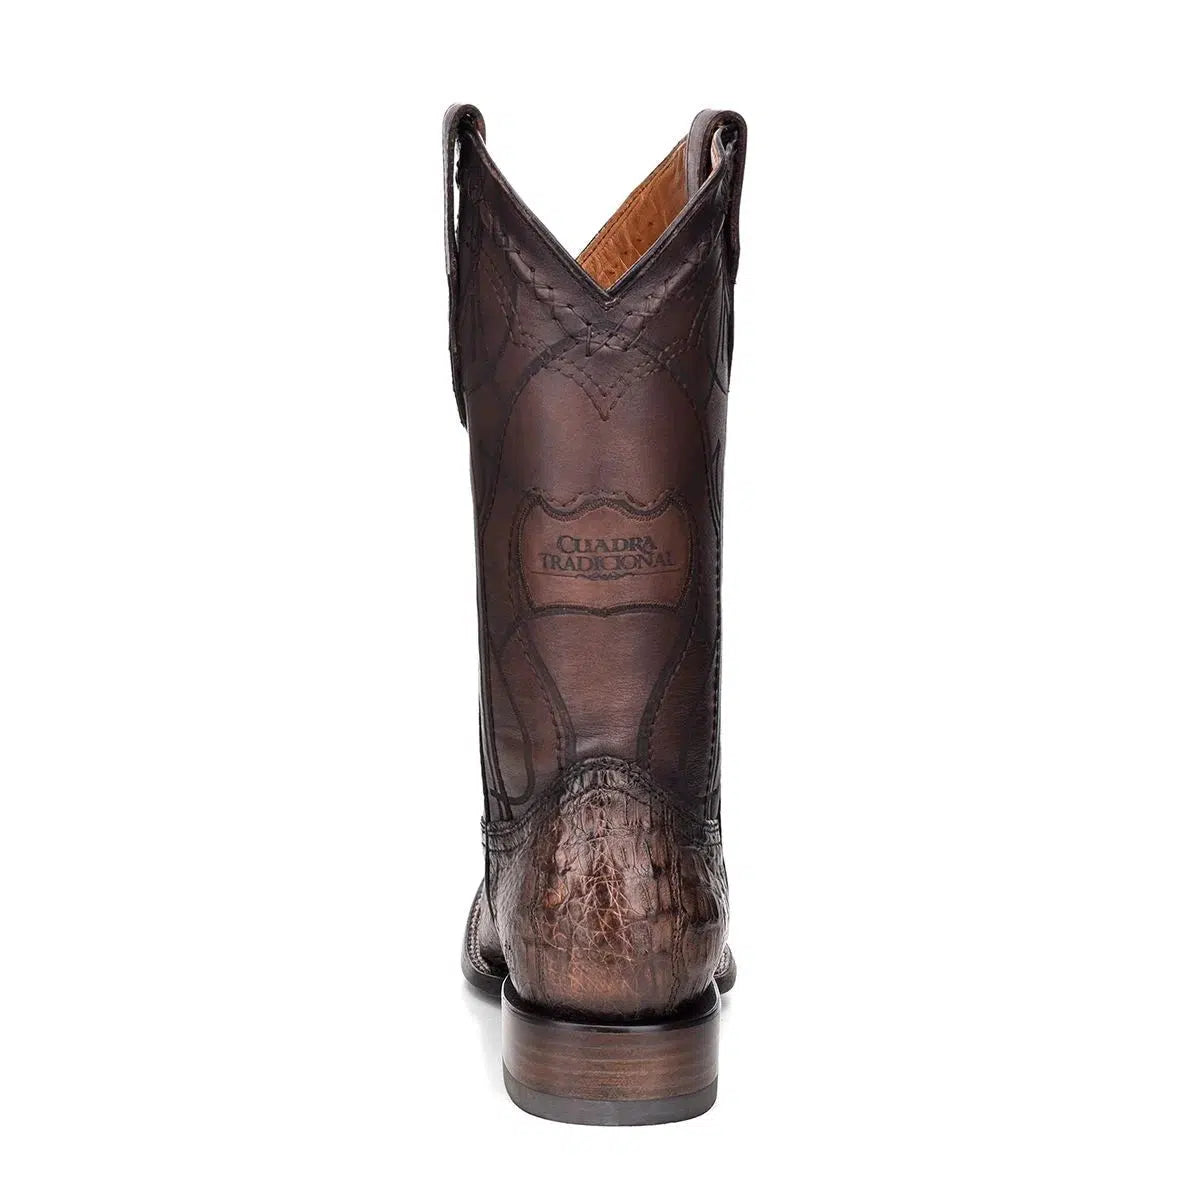 3Z1OFY - Cuadra brown western cowboy rodeo caiman leather boots for men